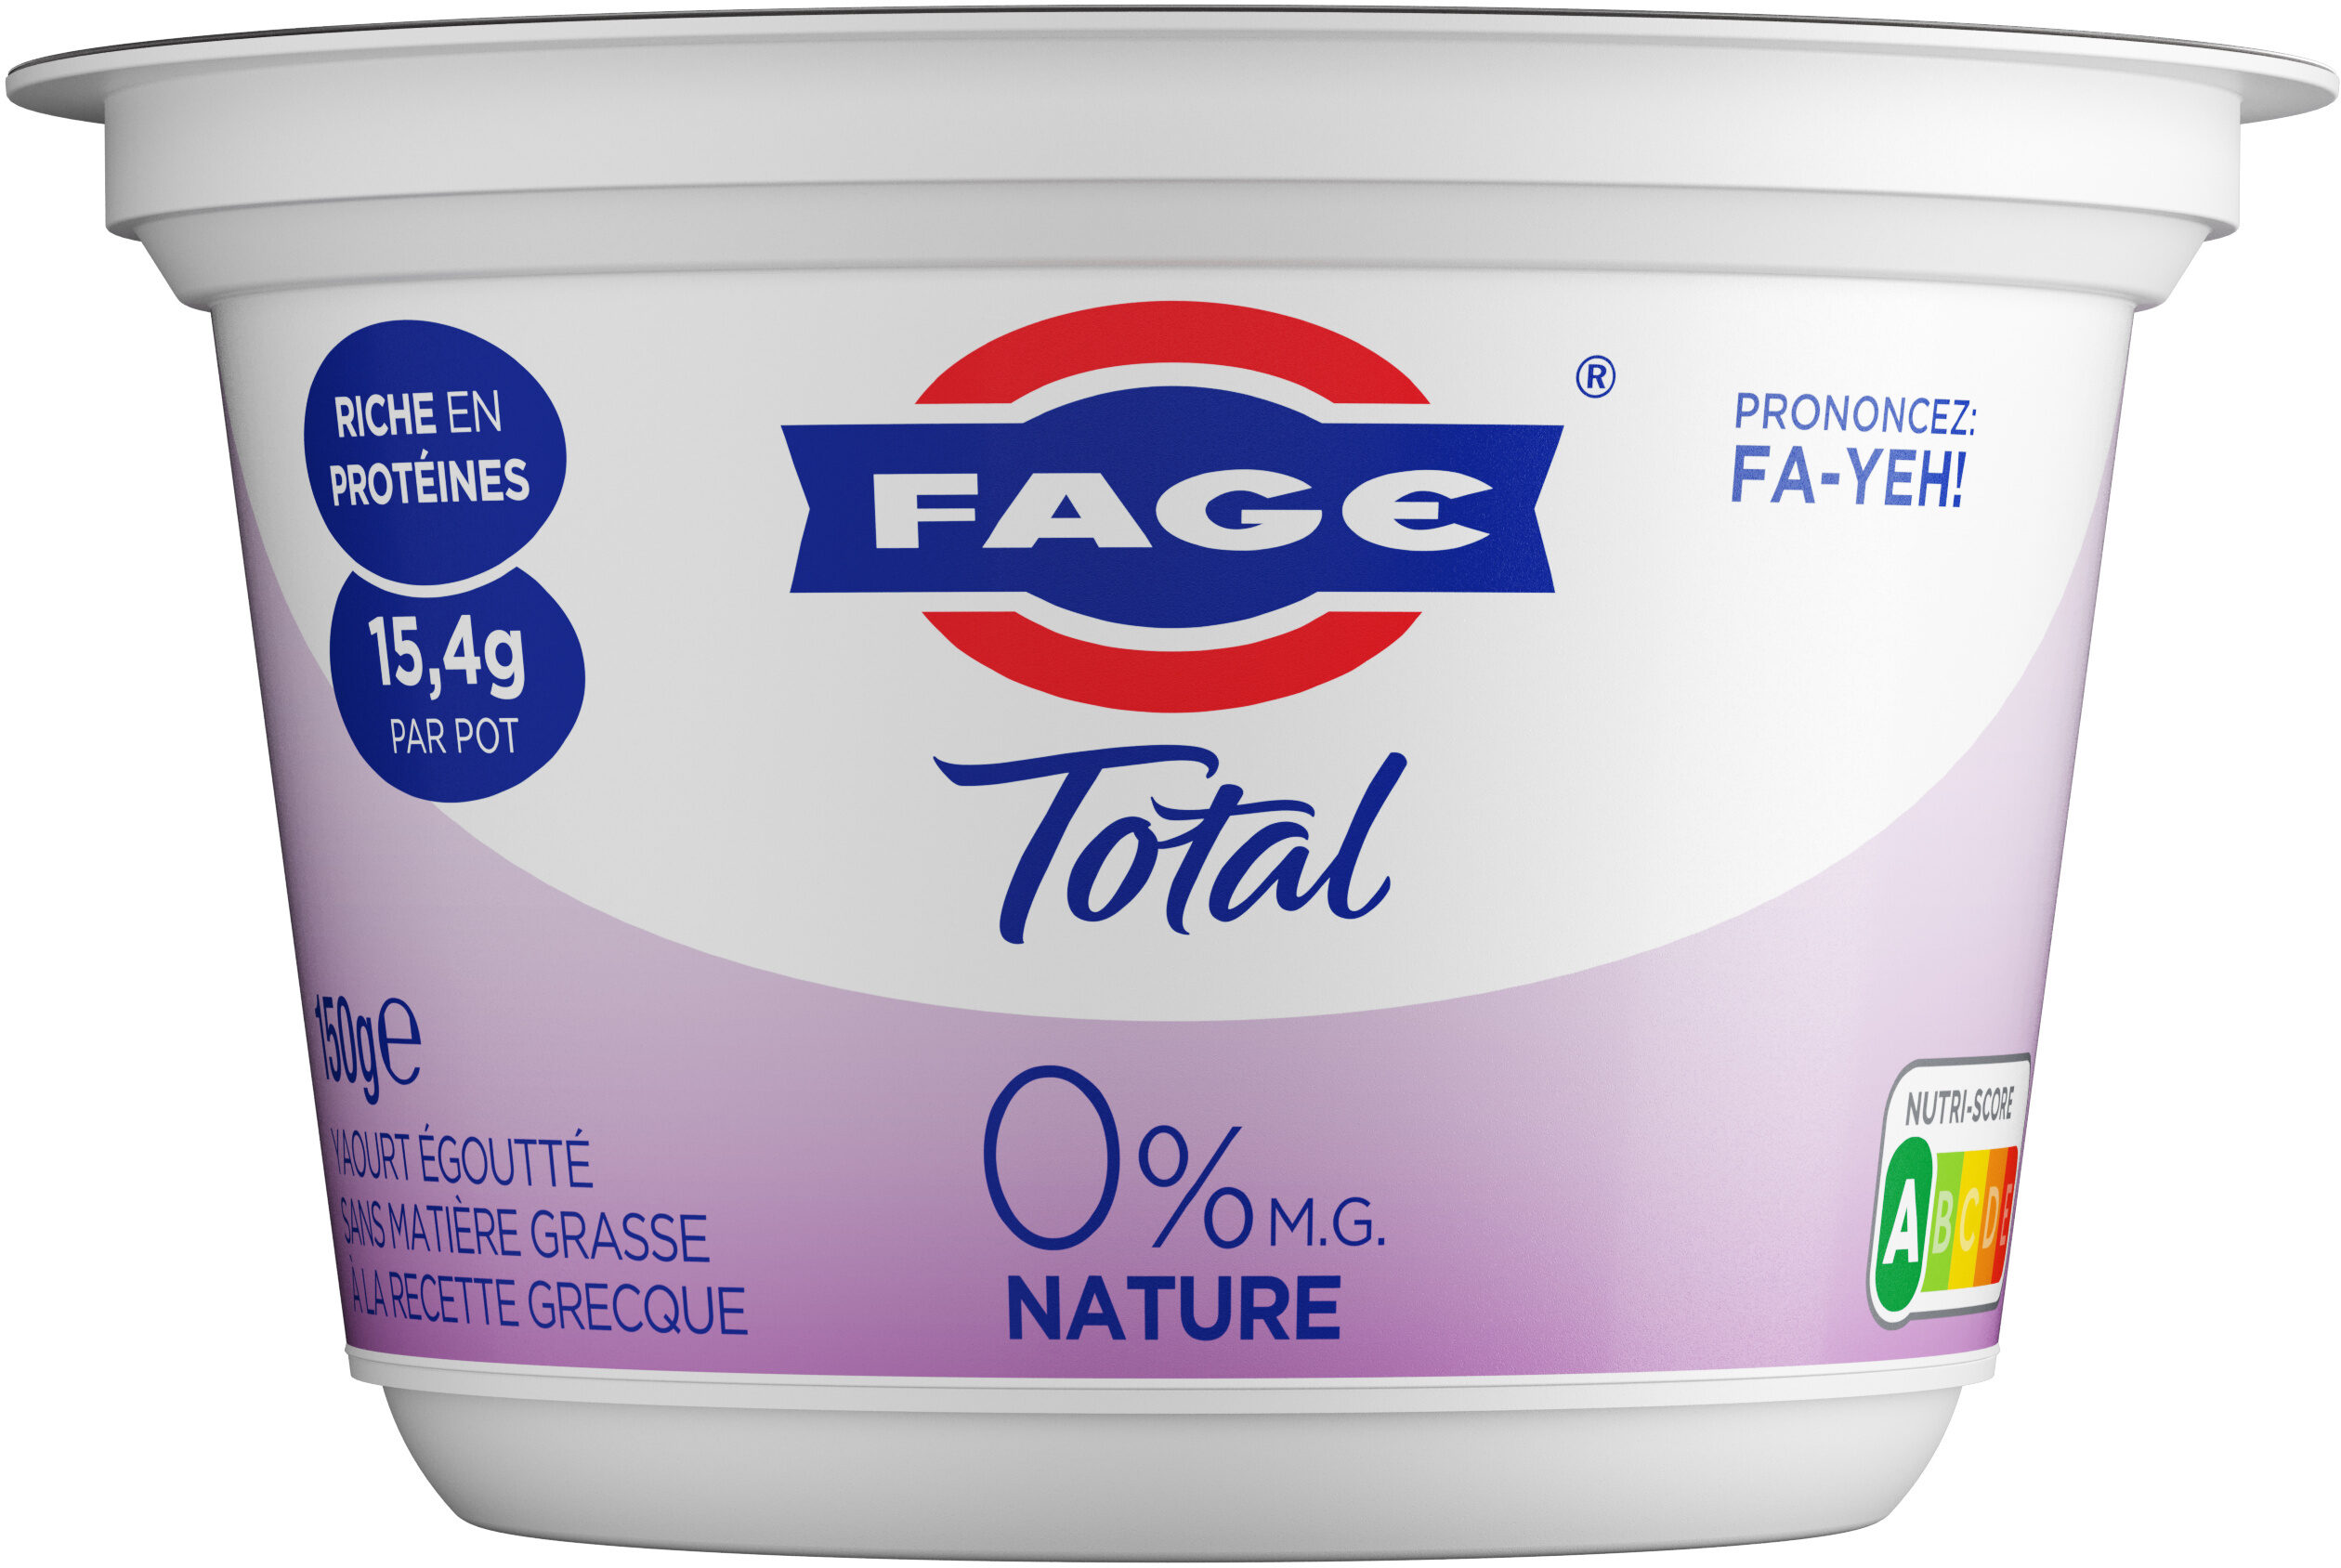 FAGE Total 0% - Product - fr